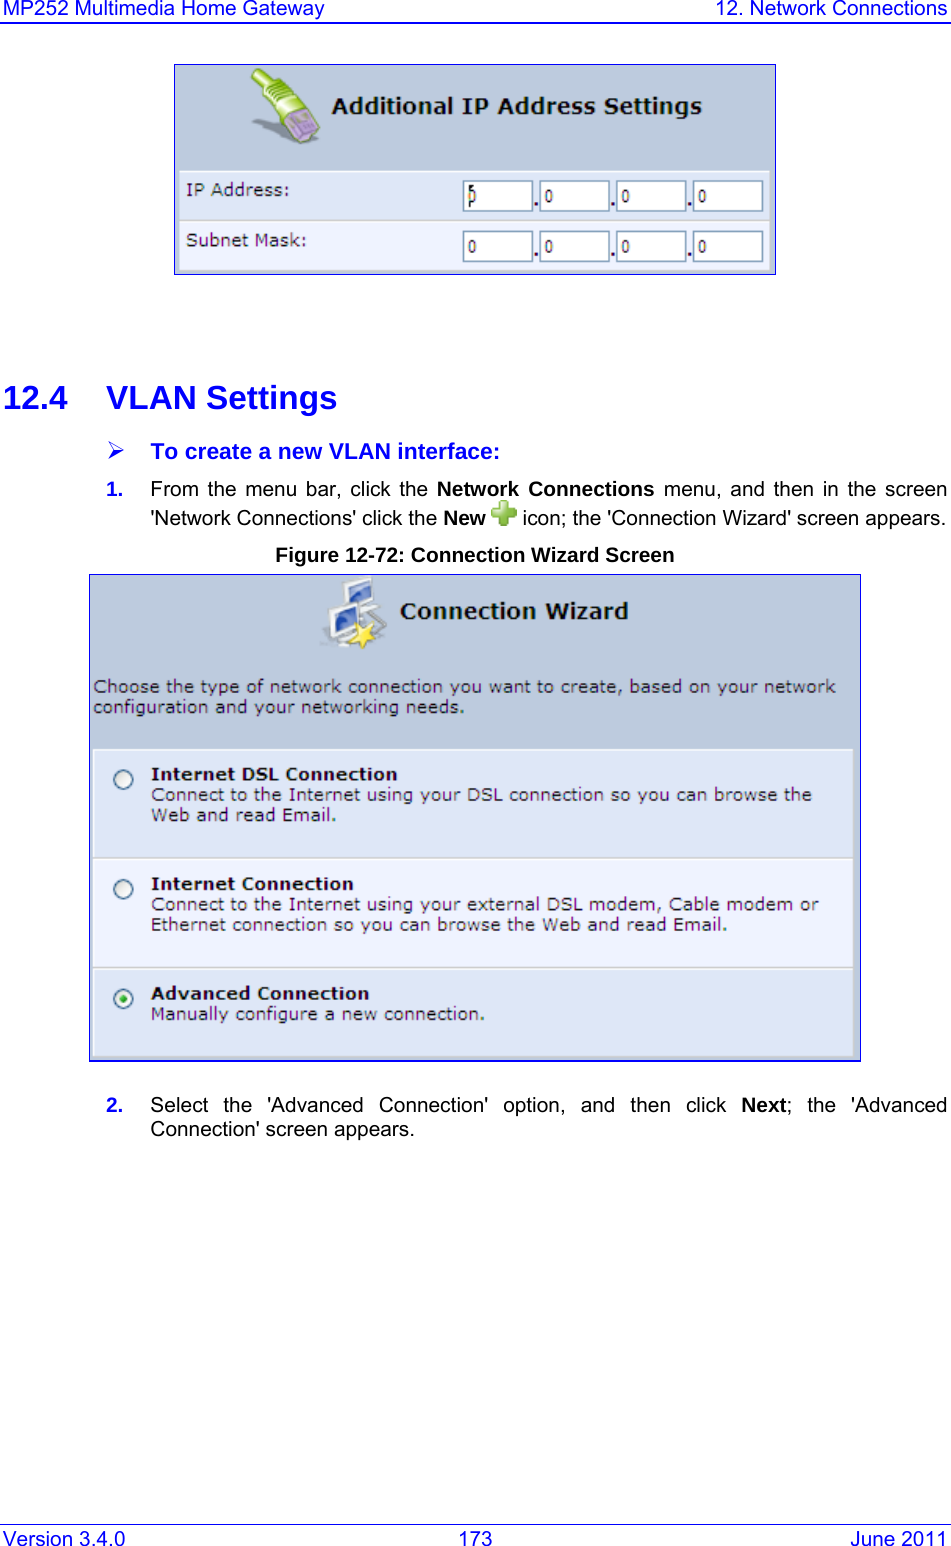 MP252 Multimedia Home Gateway  12. Network Connections Version 3.4.0  173  June 2011          12.4  VLAN Settings  ¾ To create a new VLAN interface: 1.  From the menu bar, click the Network Connections menu, and then in the screen &apos;Network Connections&apos; click the New   icon; the &apos;Connection Wizard&apos; screen appears. Figure 12-72: Connection Wizard Screen  2.  Select the &apos;Advanced Connection&apos; option, and then click Next; the &apos;Advanced Connection&apos; screen appears. 